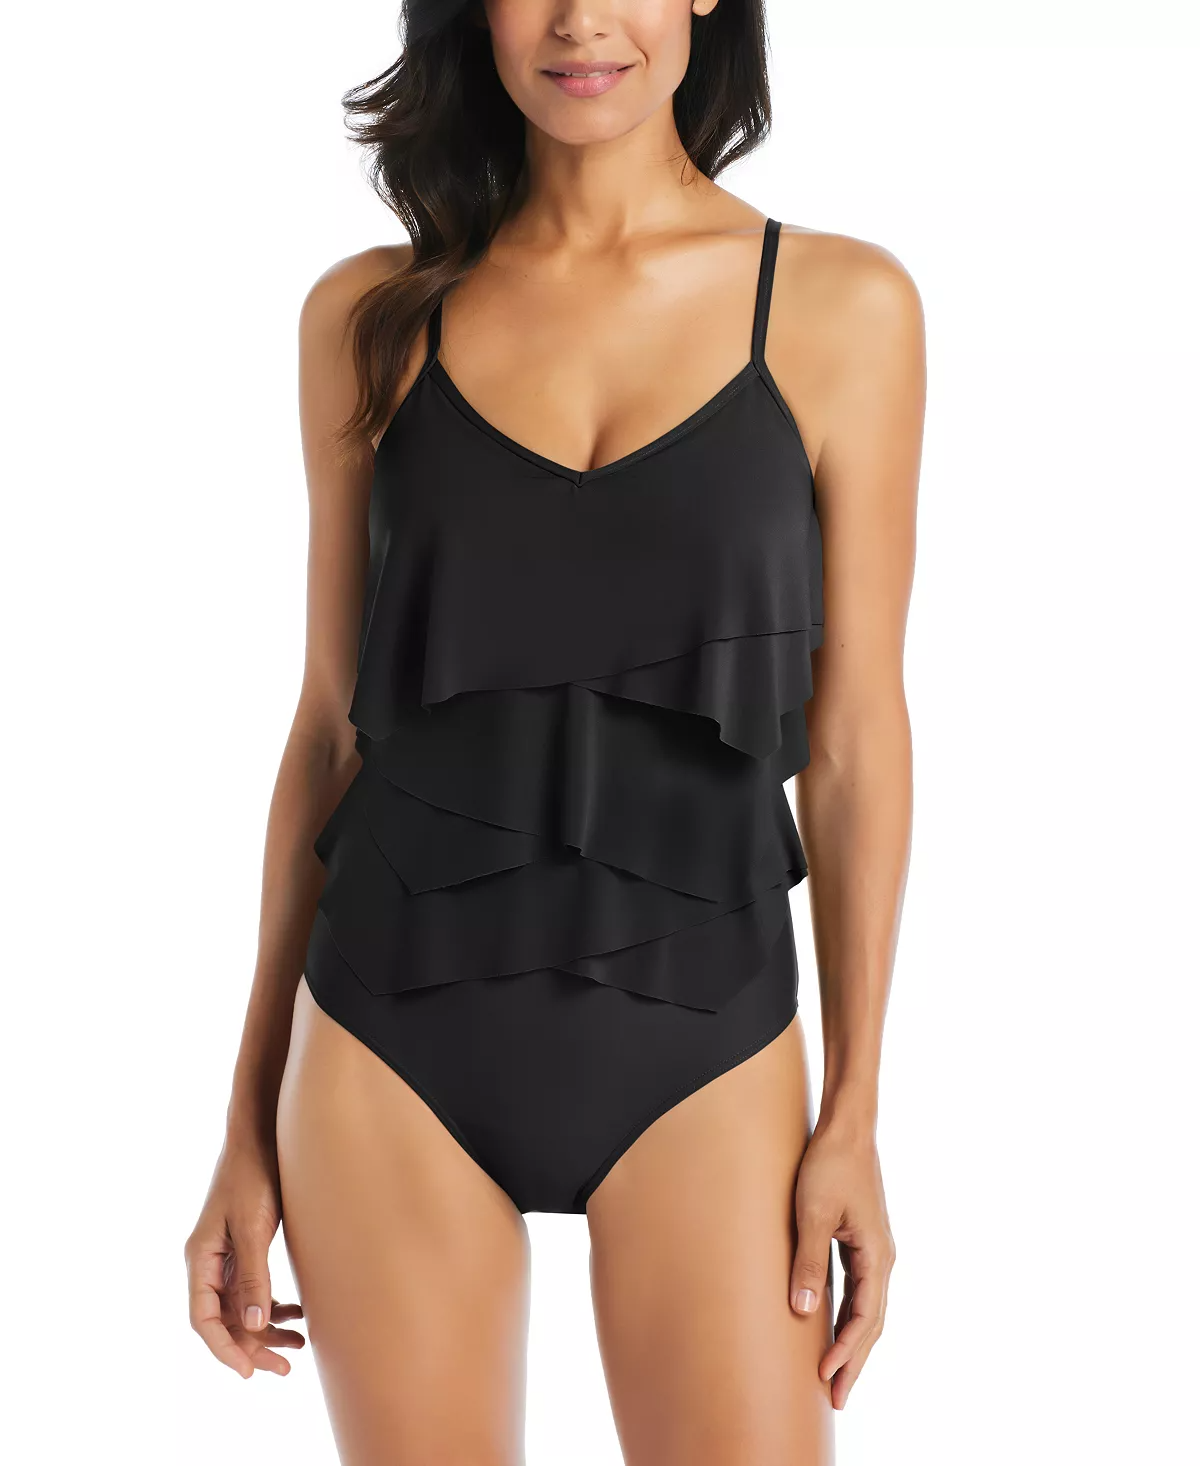 Oval Body Type Ruching or Shirring Style Swimsuit